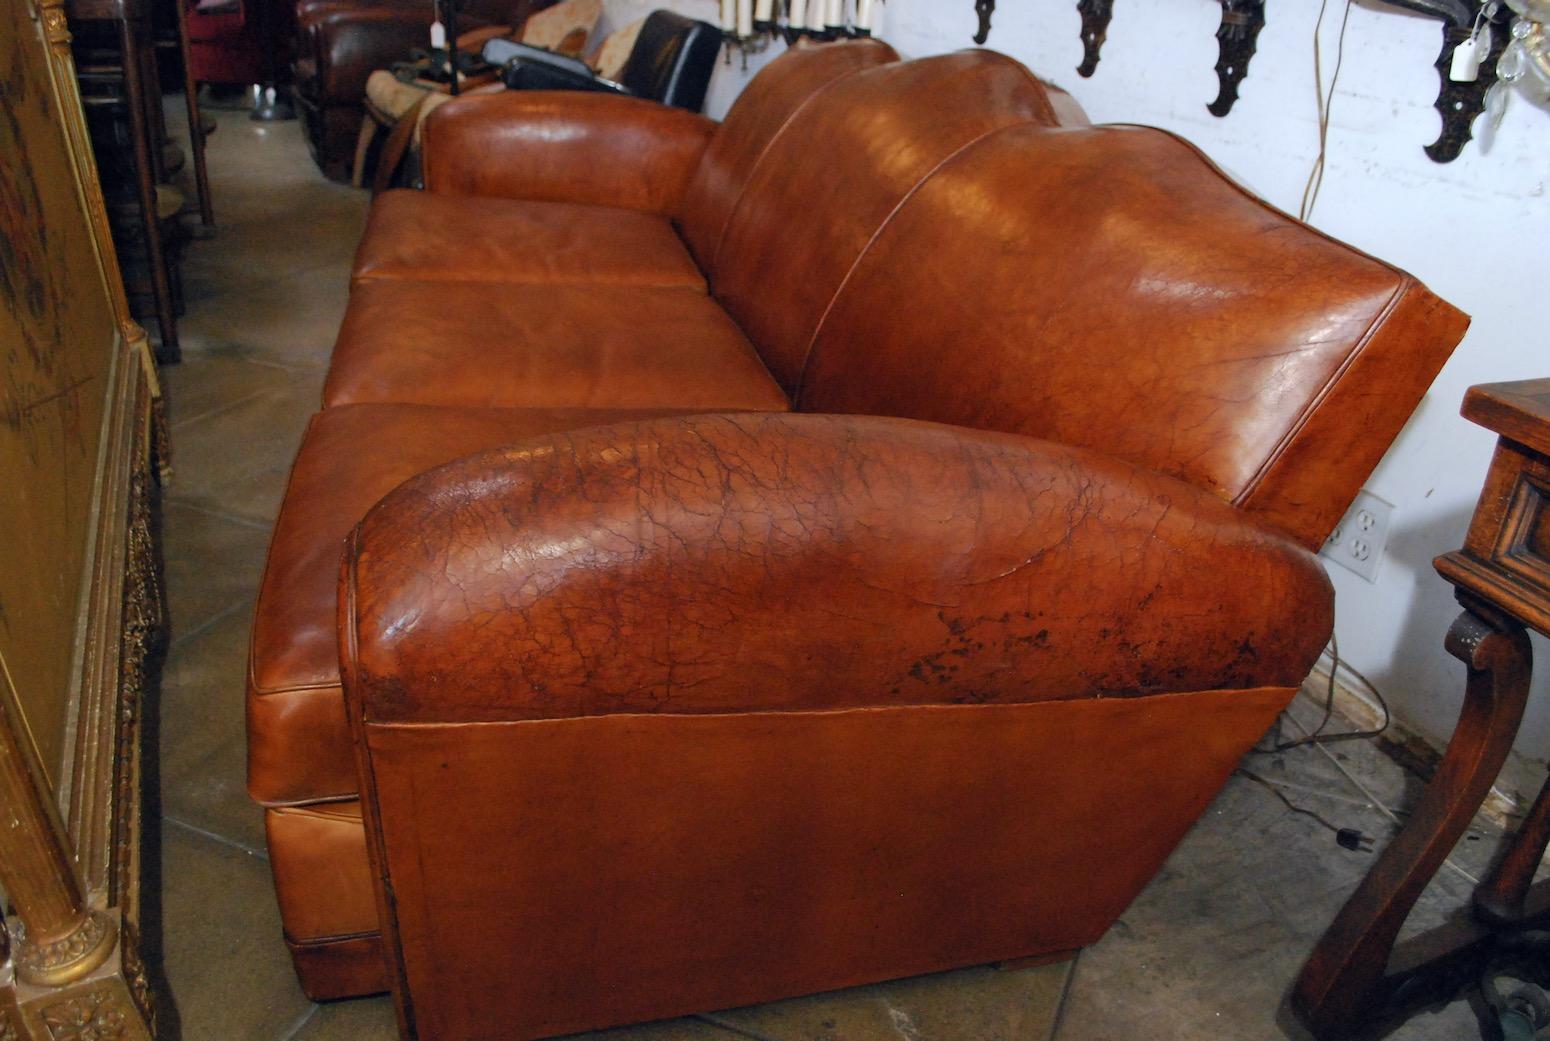 A Beautiful and very rare Leather club sofa, the last time I saw one of this beauty was 17 years ago,
If i did not have a crazy three years old son, I would keep it for me, I spent more then two hours trying to get the true color and beauty of this